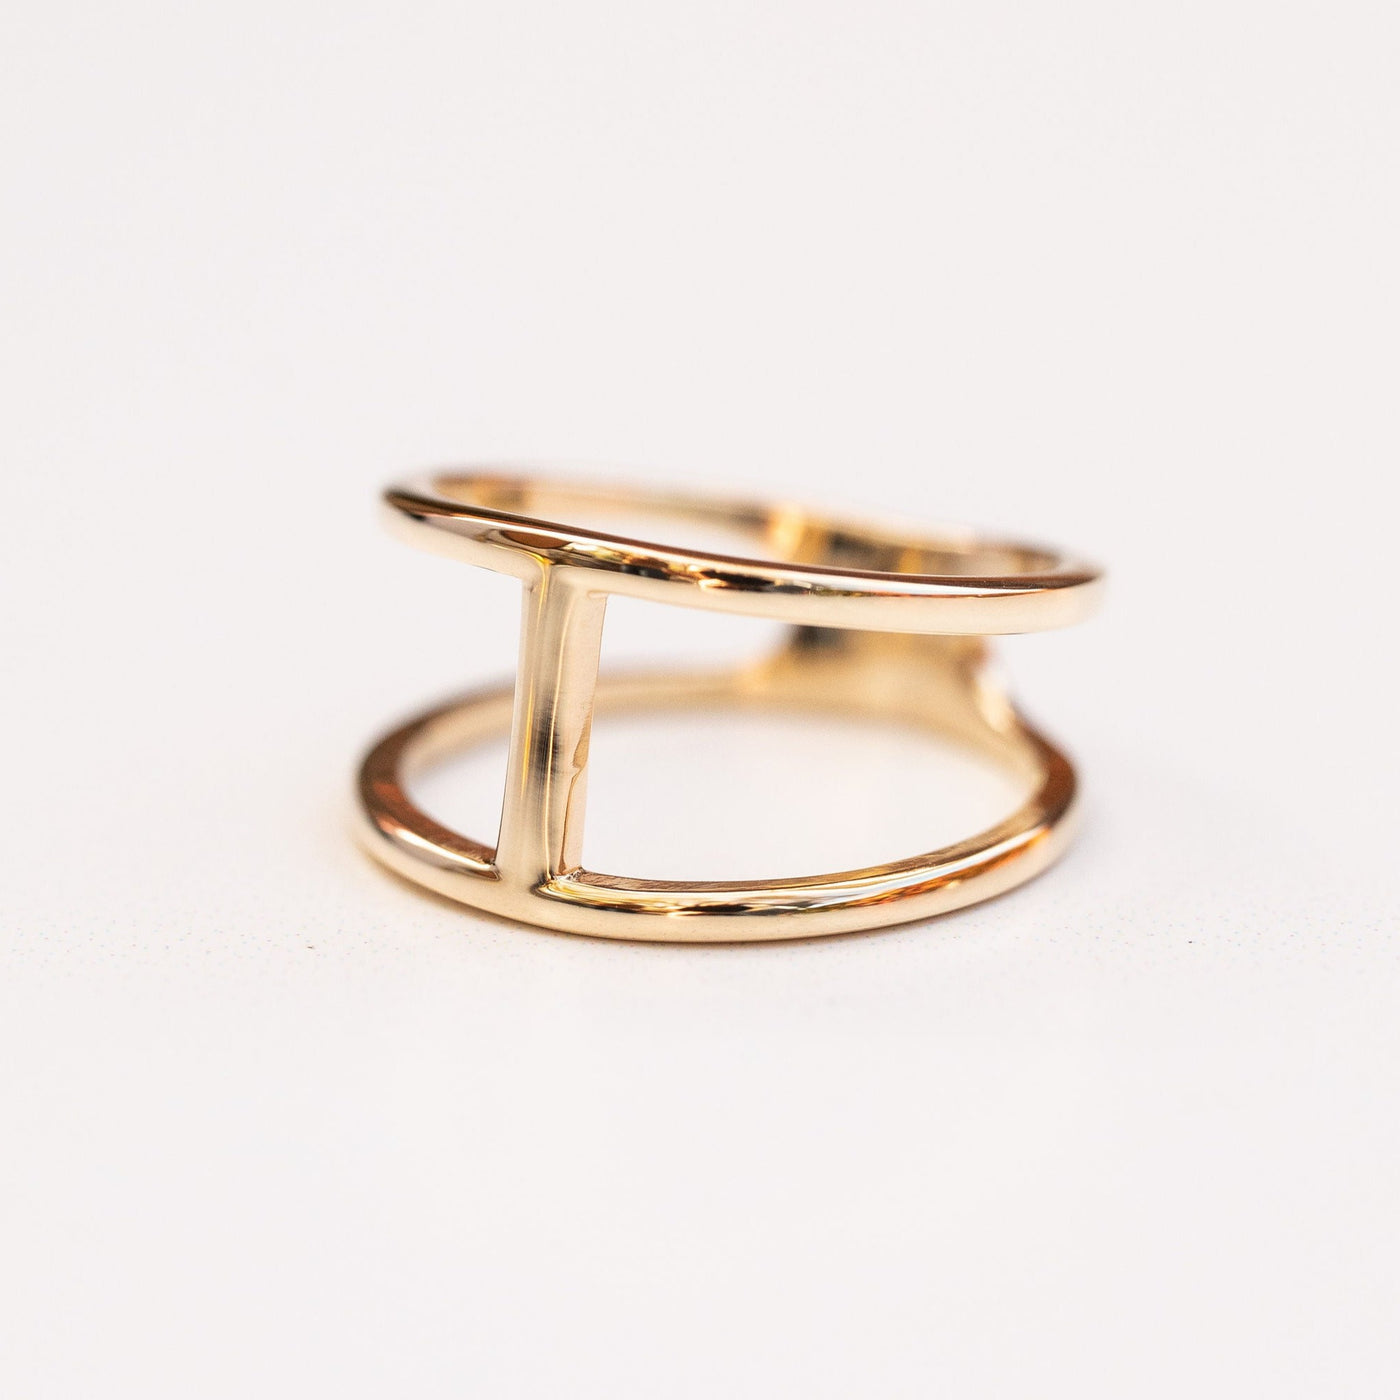 14k Yellow Gold Negative Space Ring